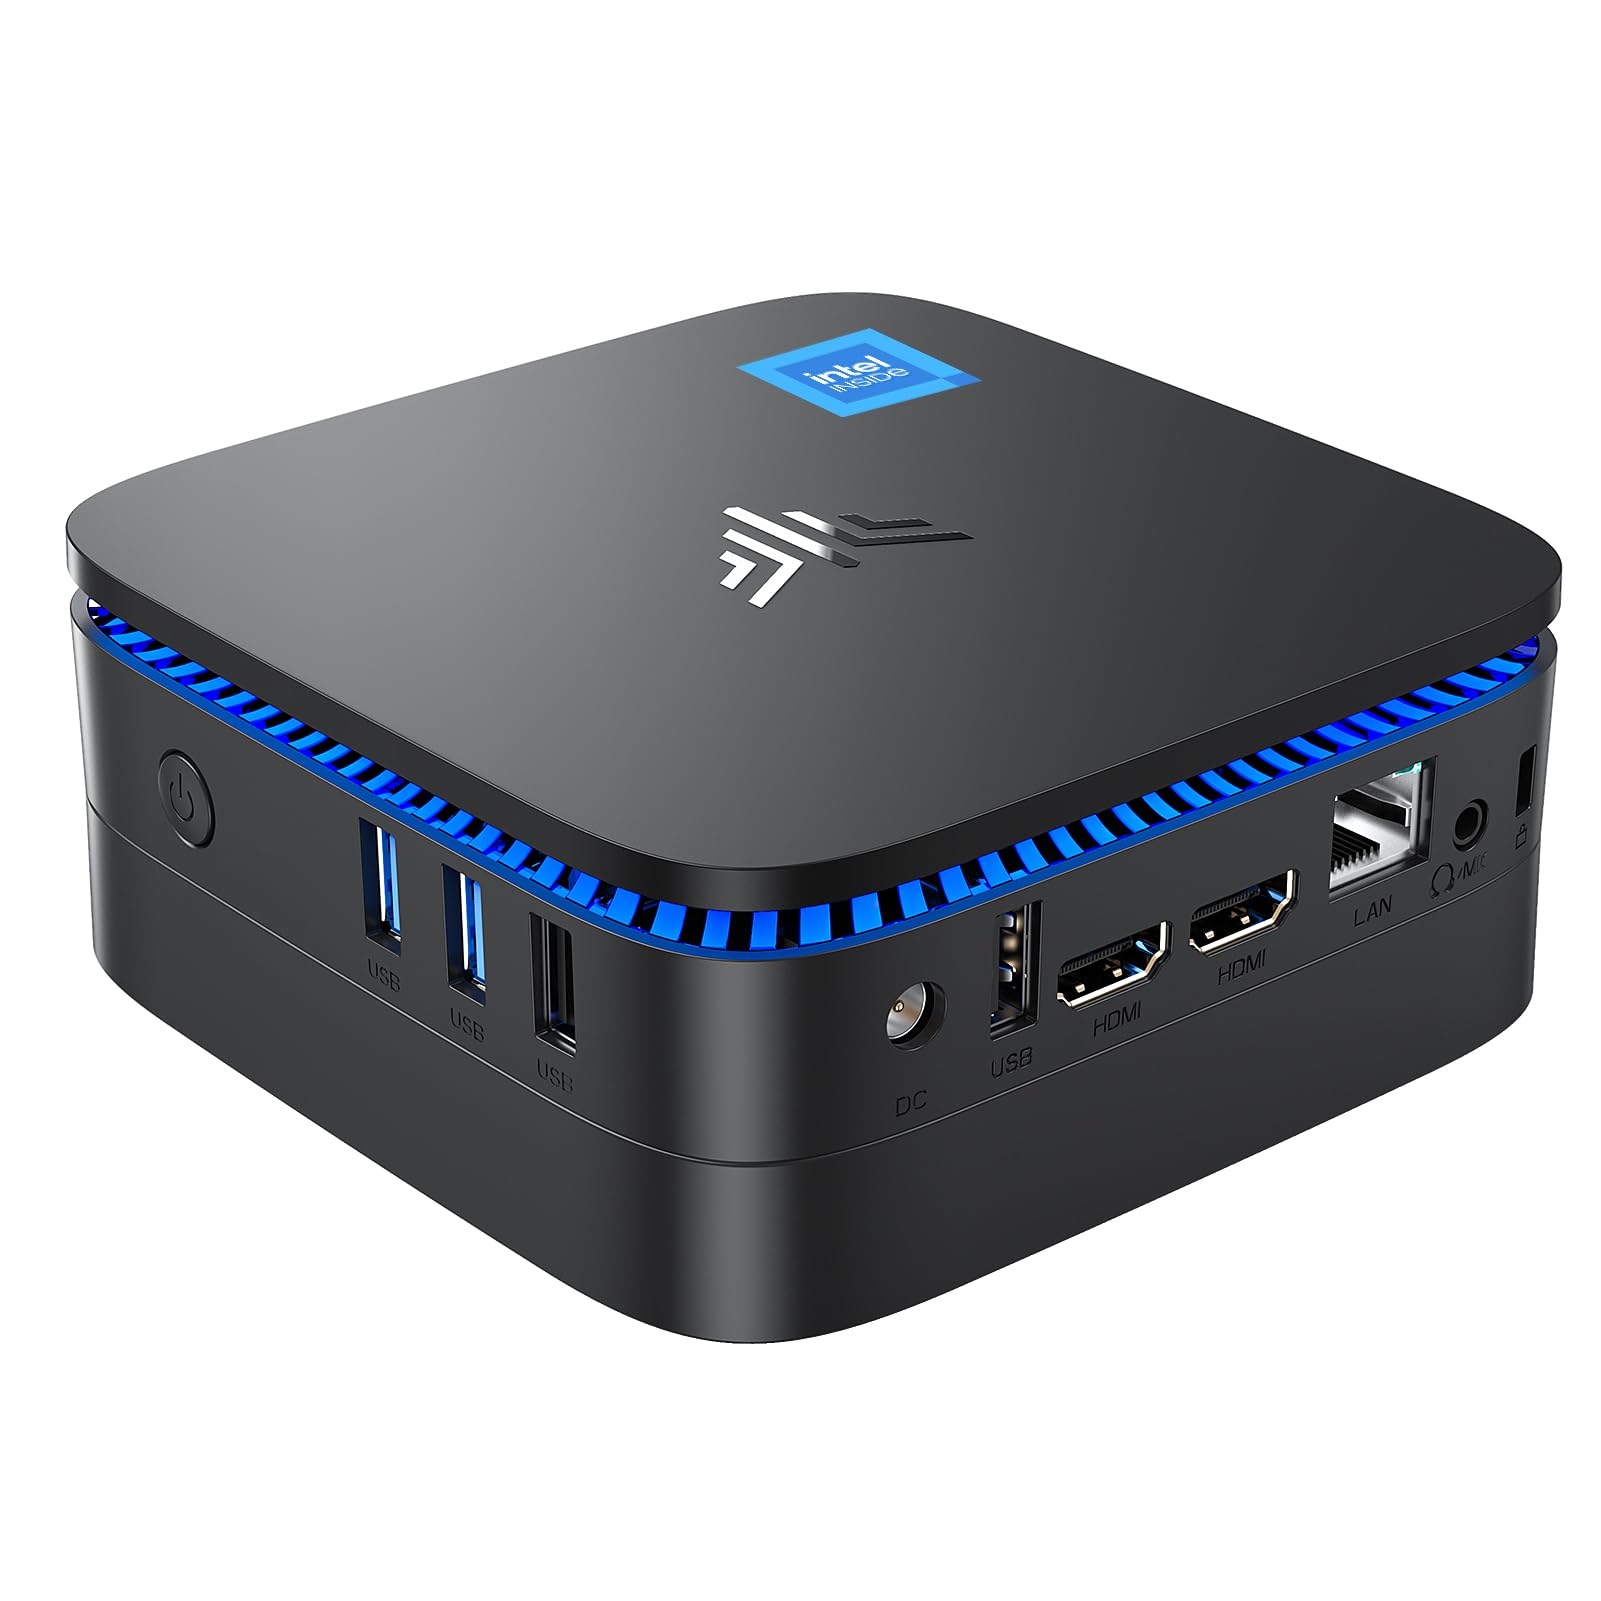 KAMRUI AK1PLUS Mini PC with Intel Alder Lake N97(up to 3.60 GHz), 16GB RAM 512GB ROM Small Desktop Computer, 4K UHD Mini Computers Support WiFi 6 BT5.2 Dual HDMI LAN on Business Home Office Family-NAS